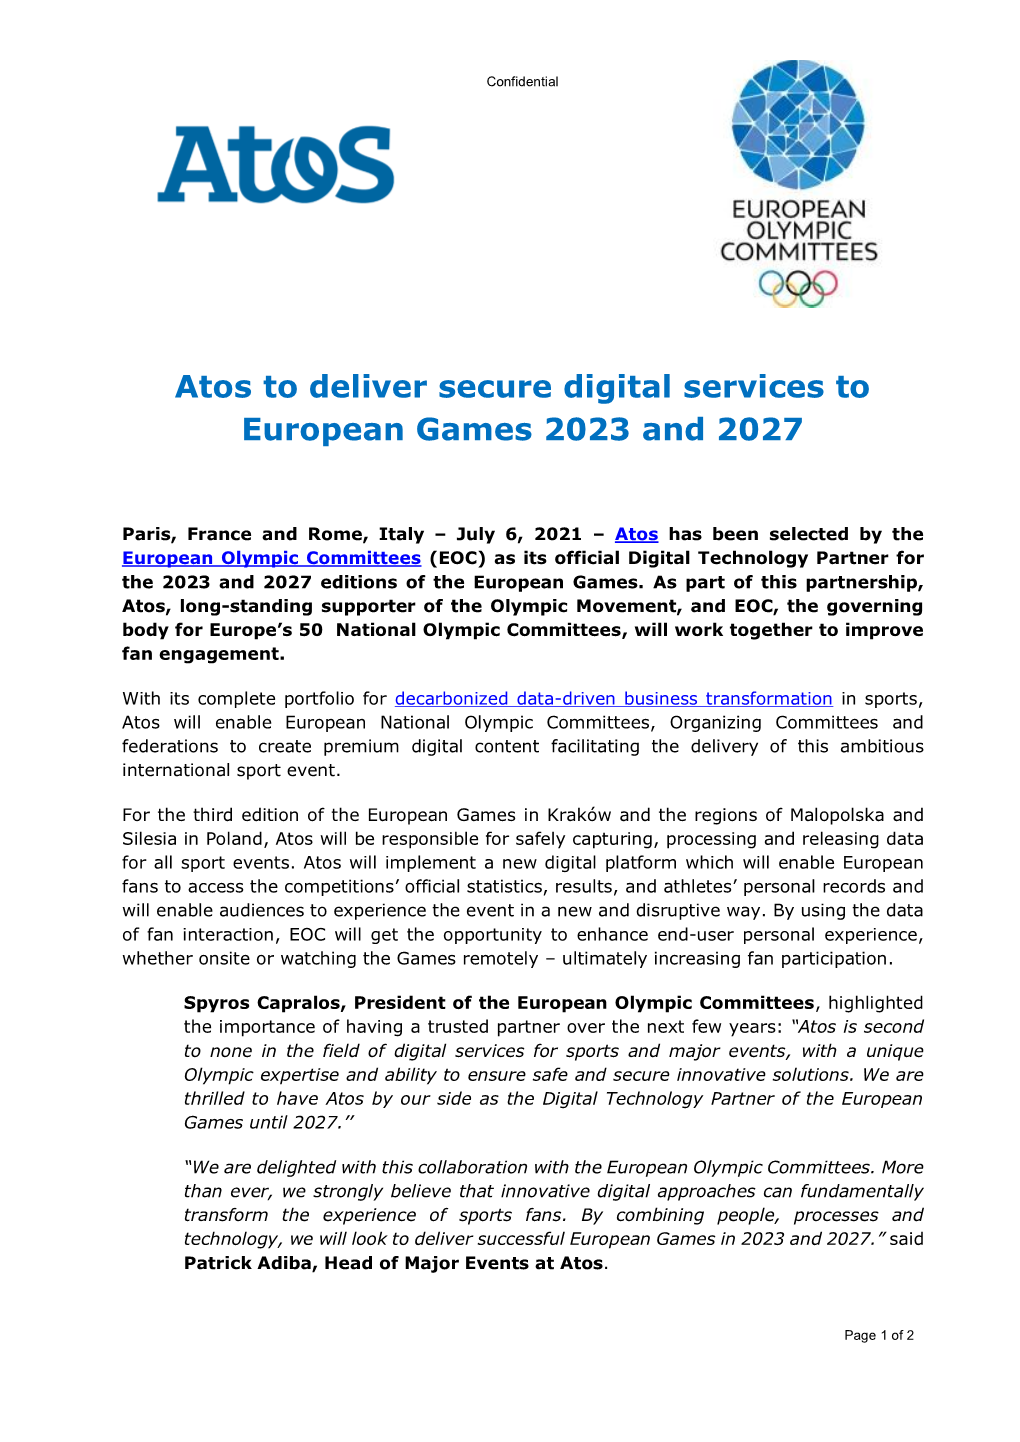 Atos to Deliver Secure Digital Services to European Games 2023 and 2027